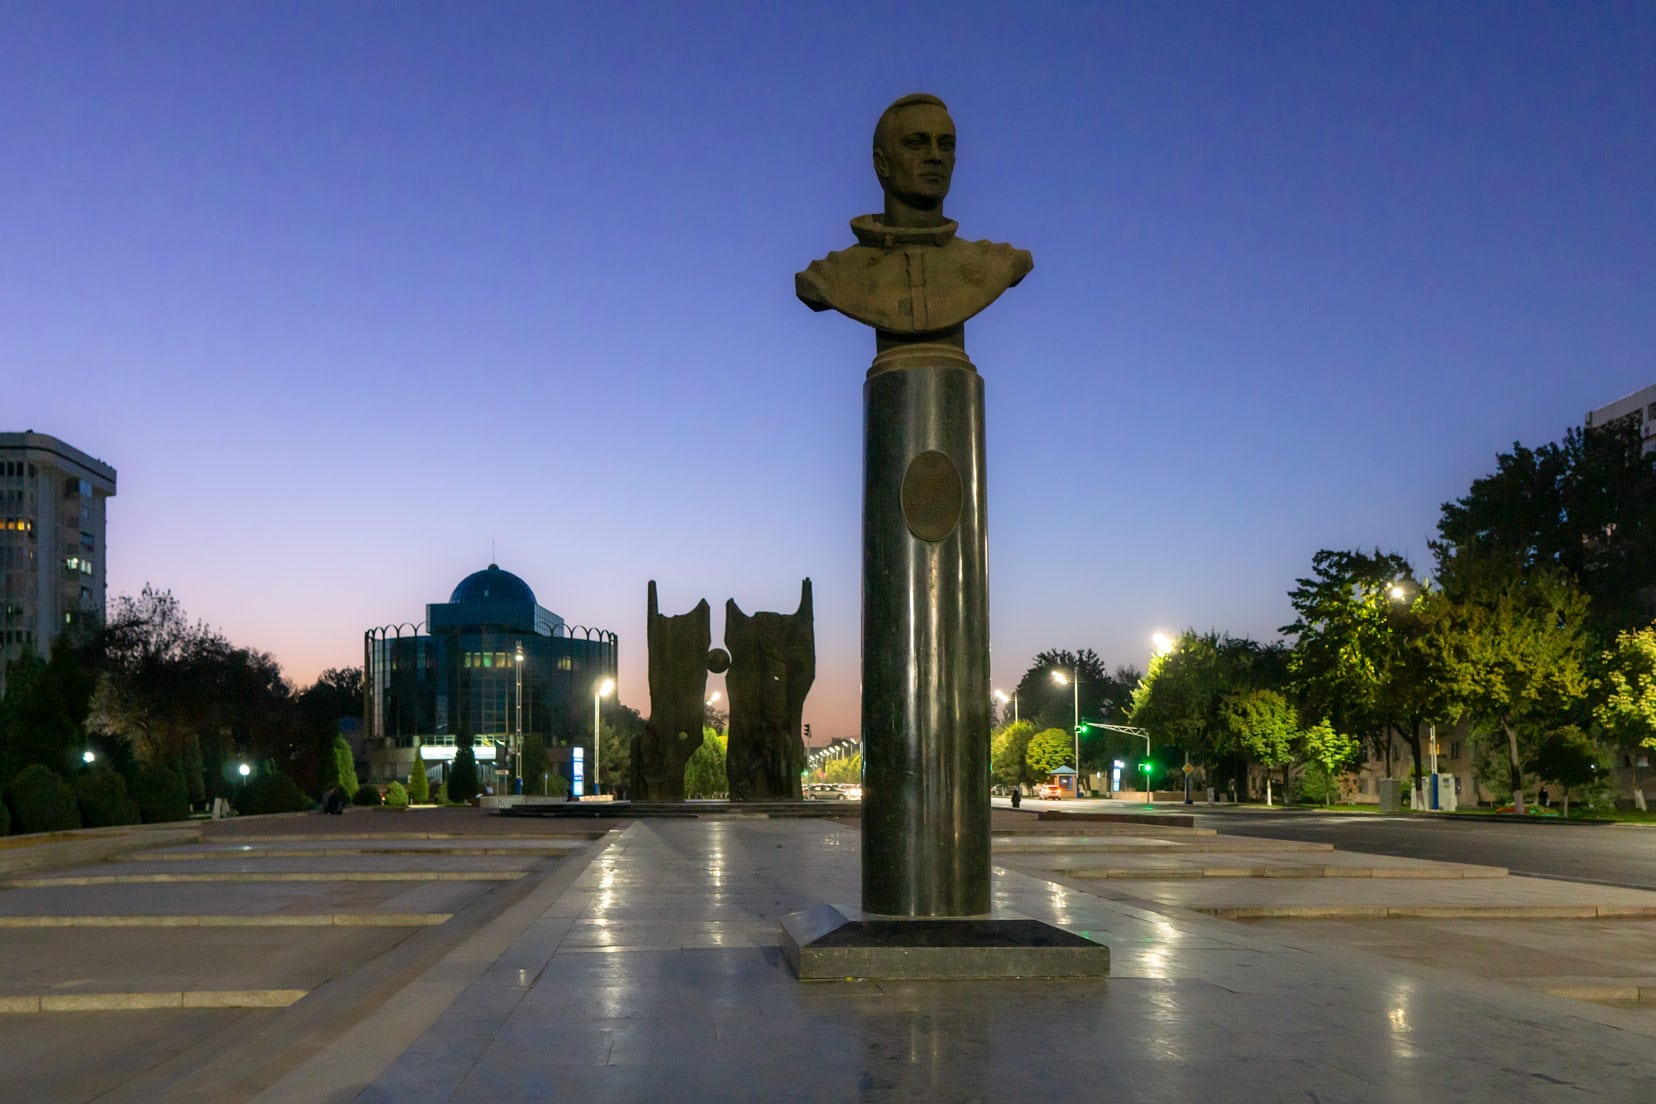 Park statues and monuments in Tashkent